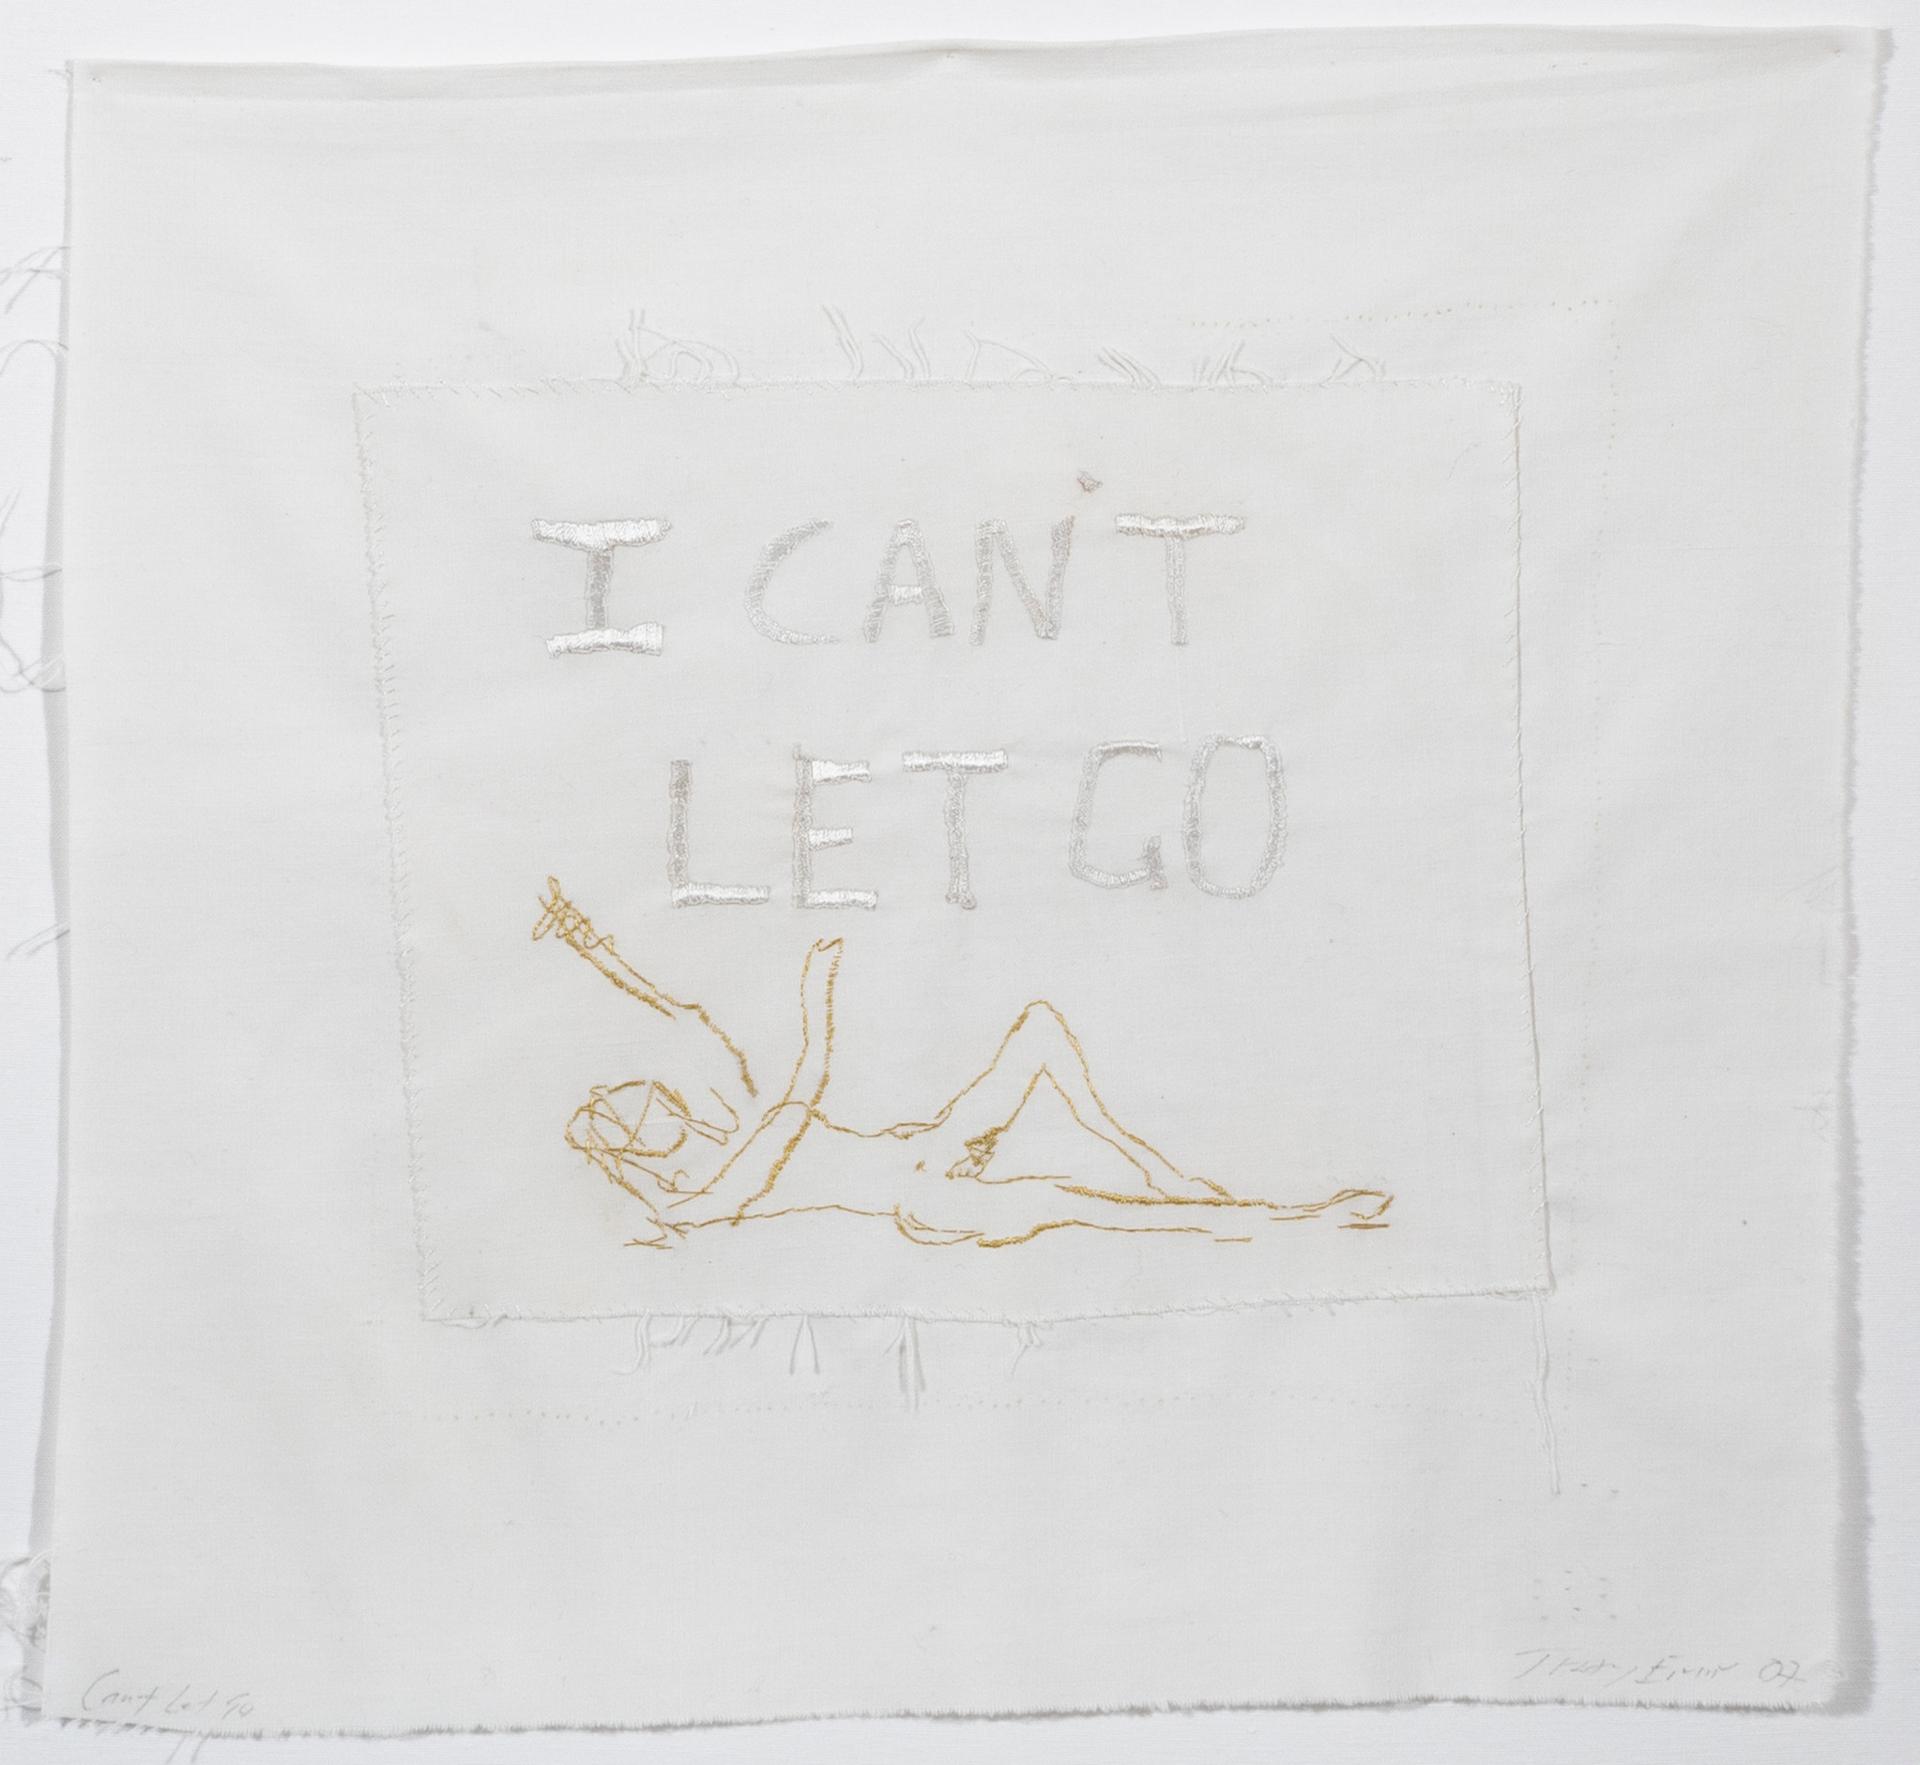 Tracey Emin - I Can't Let Go, 2007